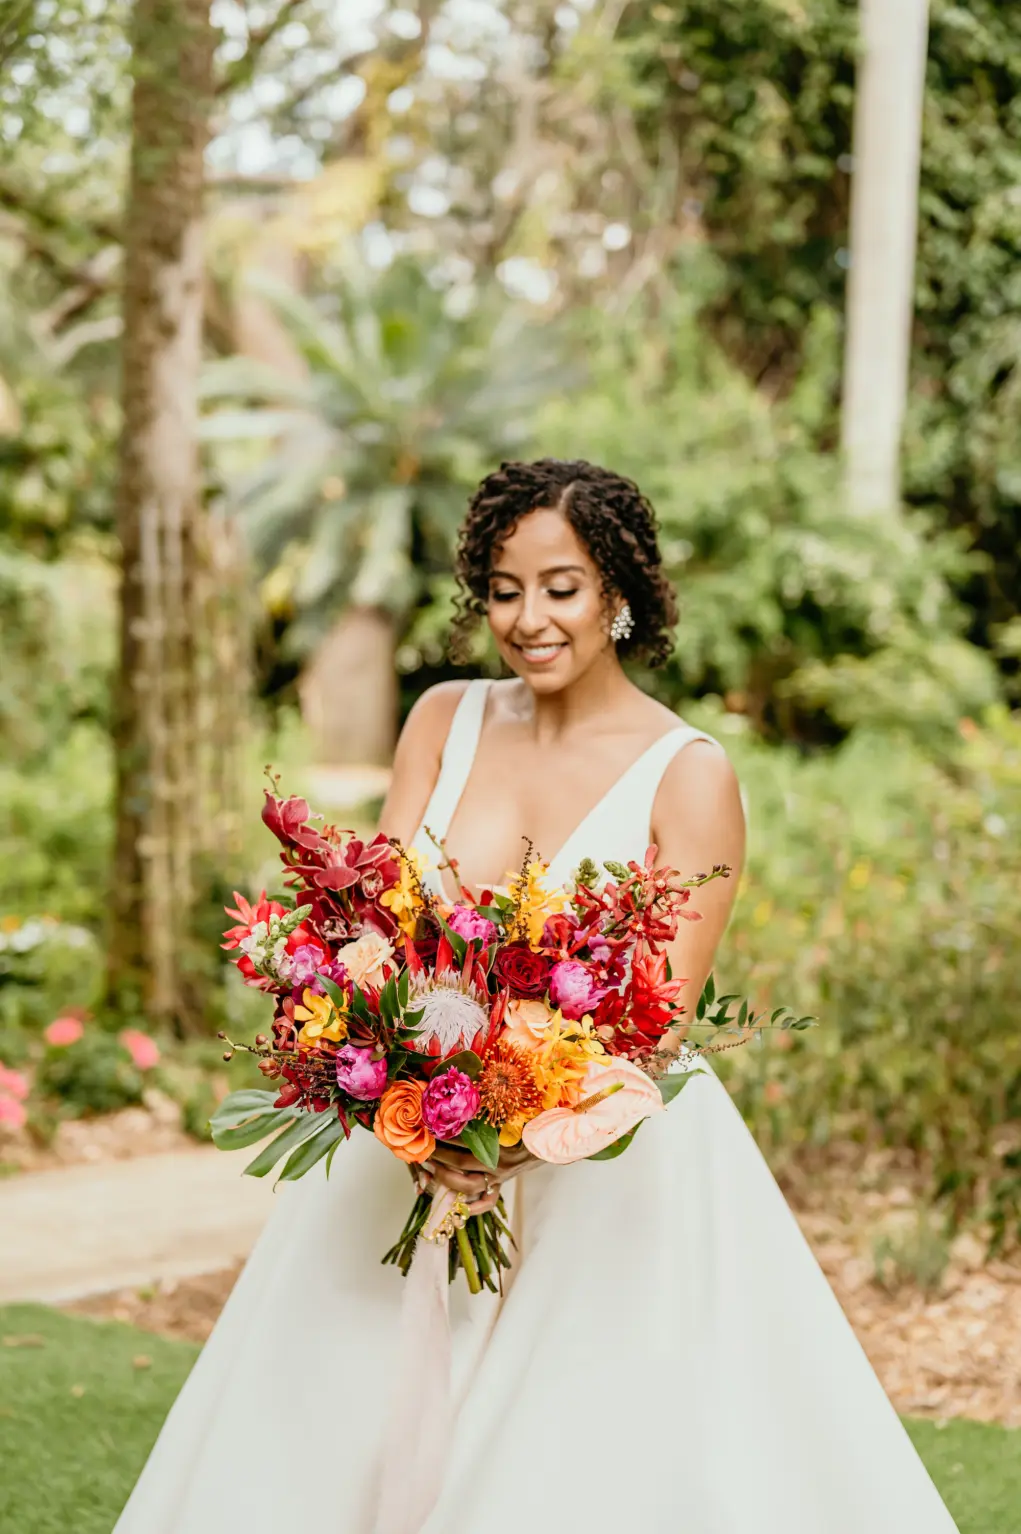 Tropical Bridal Bouquet with Red King Protea, Orange Pincushion Protea, Pink Roses, Orchids, and Palm Leaves | St Pete Florist Save The Date Florida